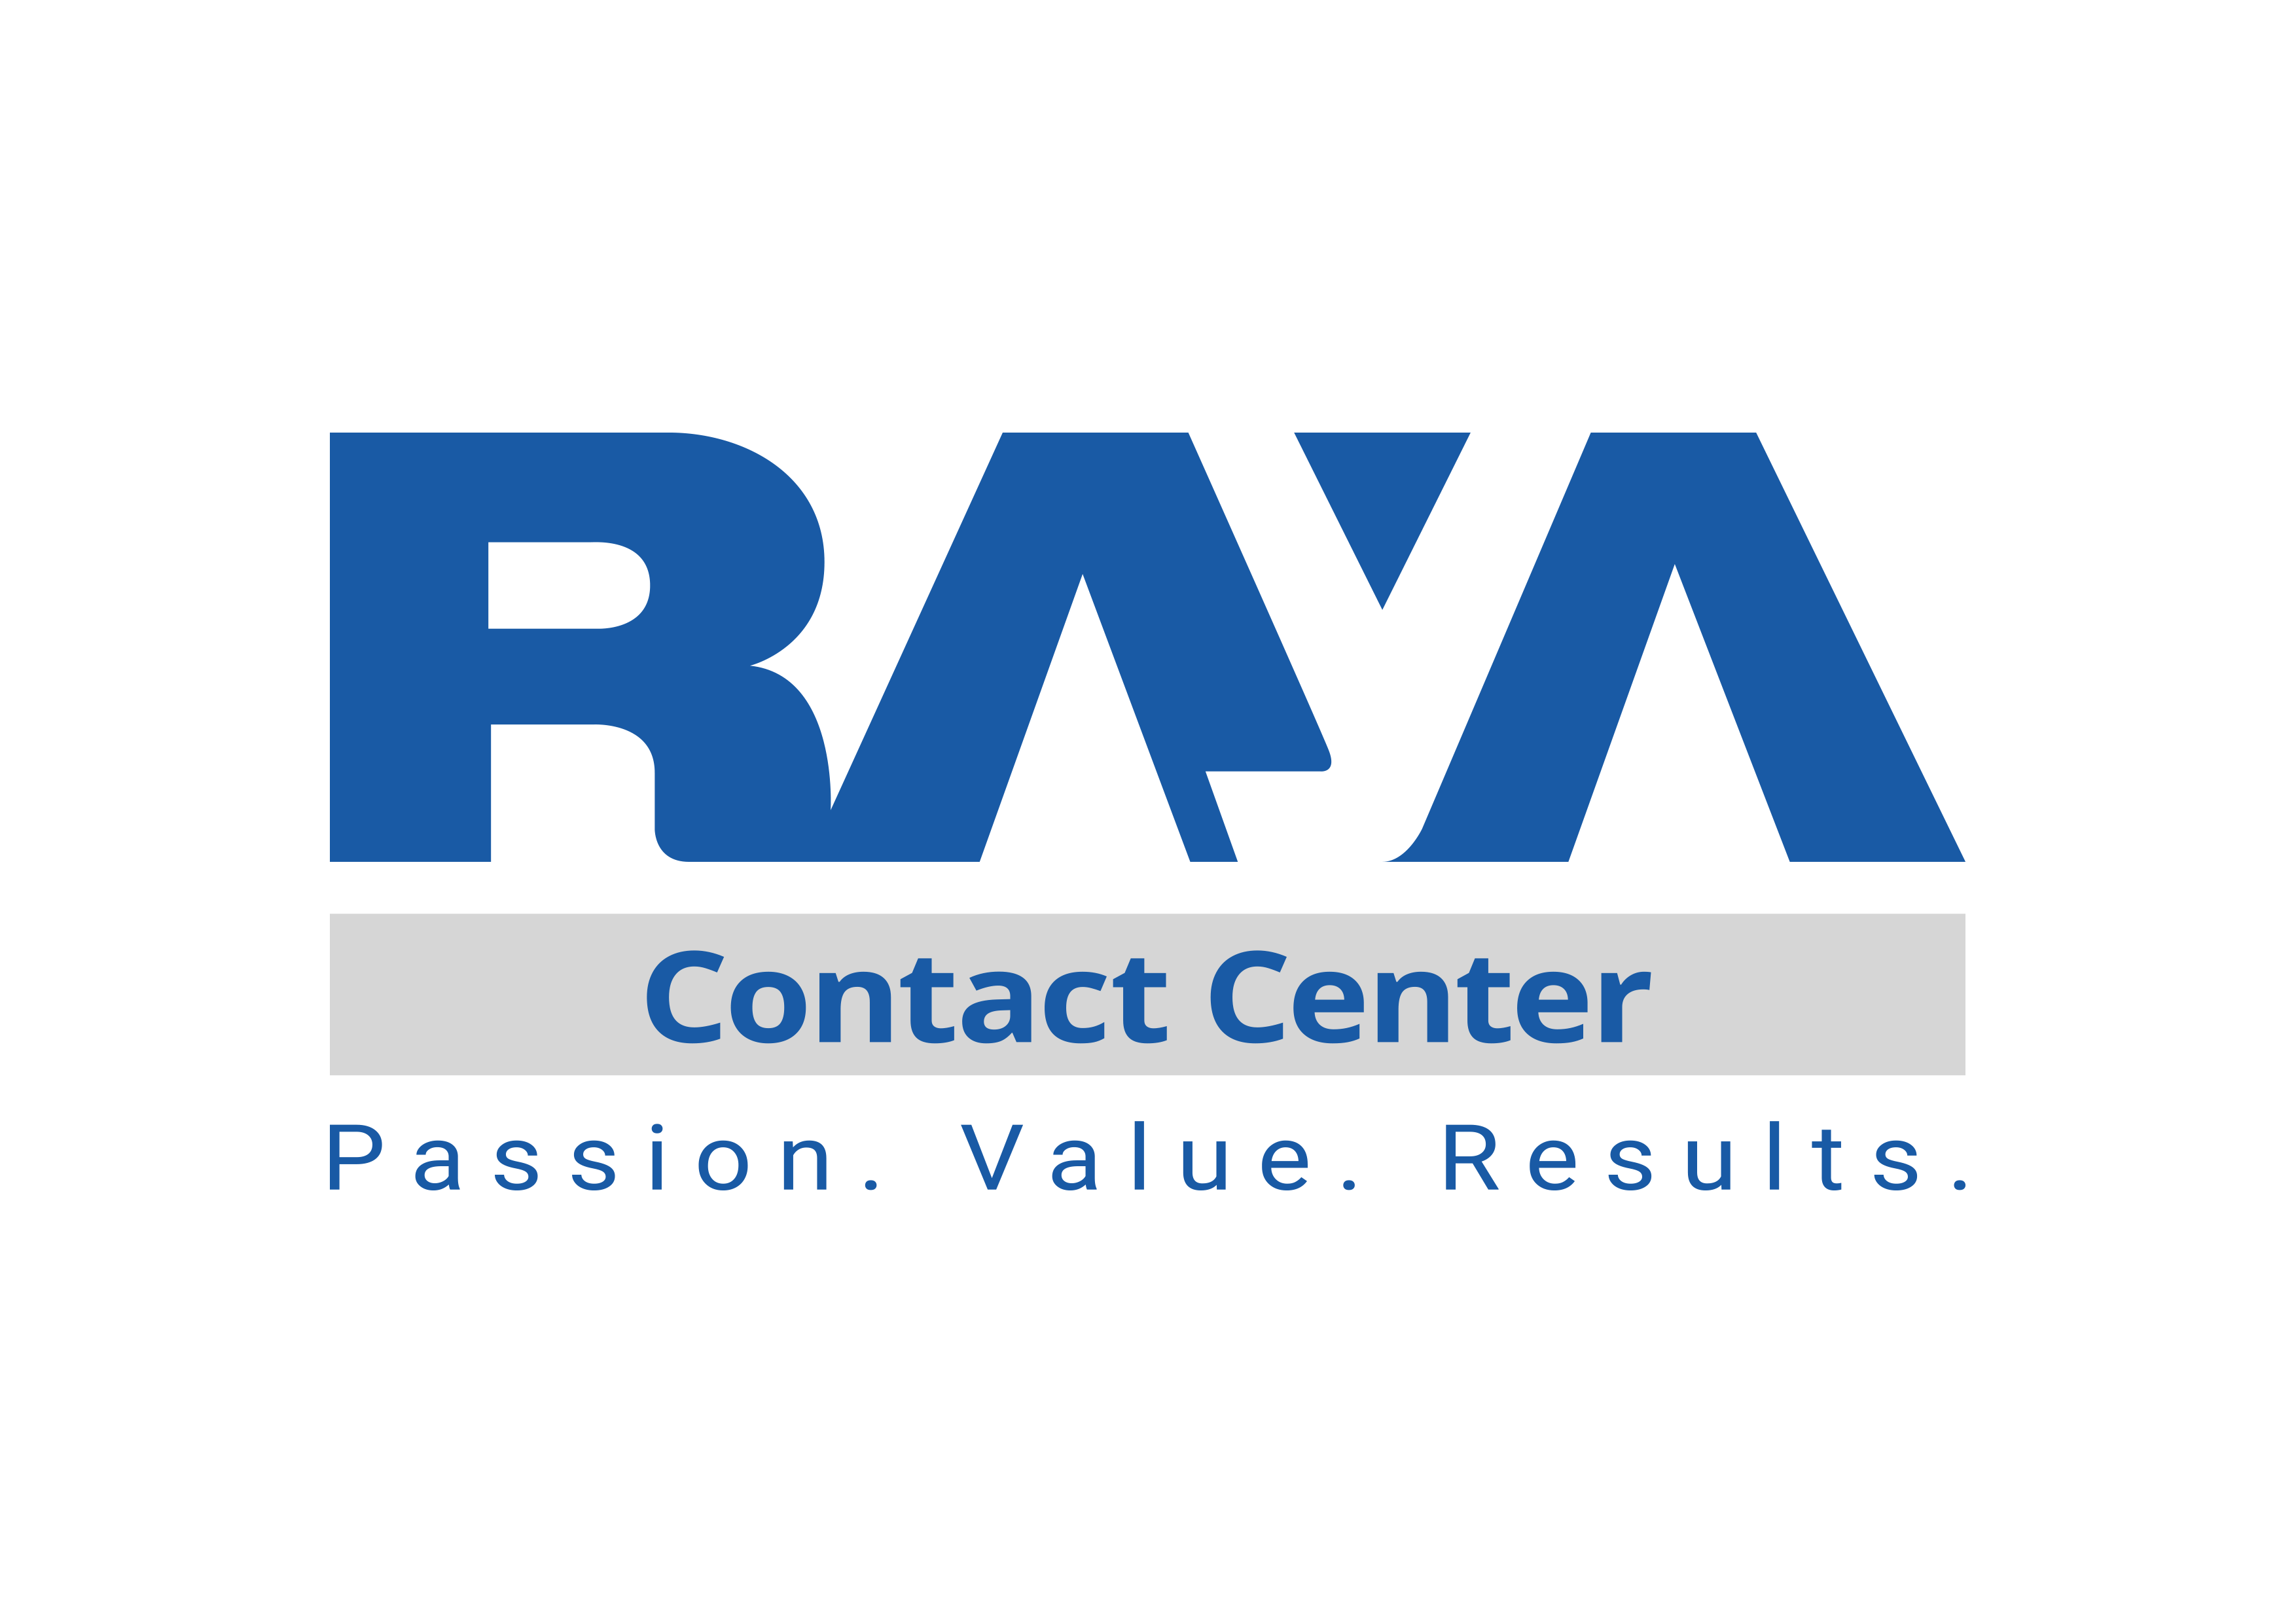 Raya Contact Center profile on Qualified.One